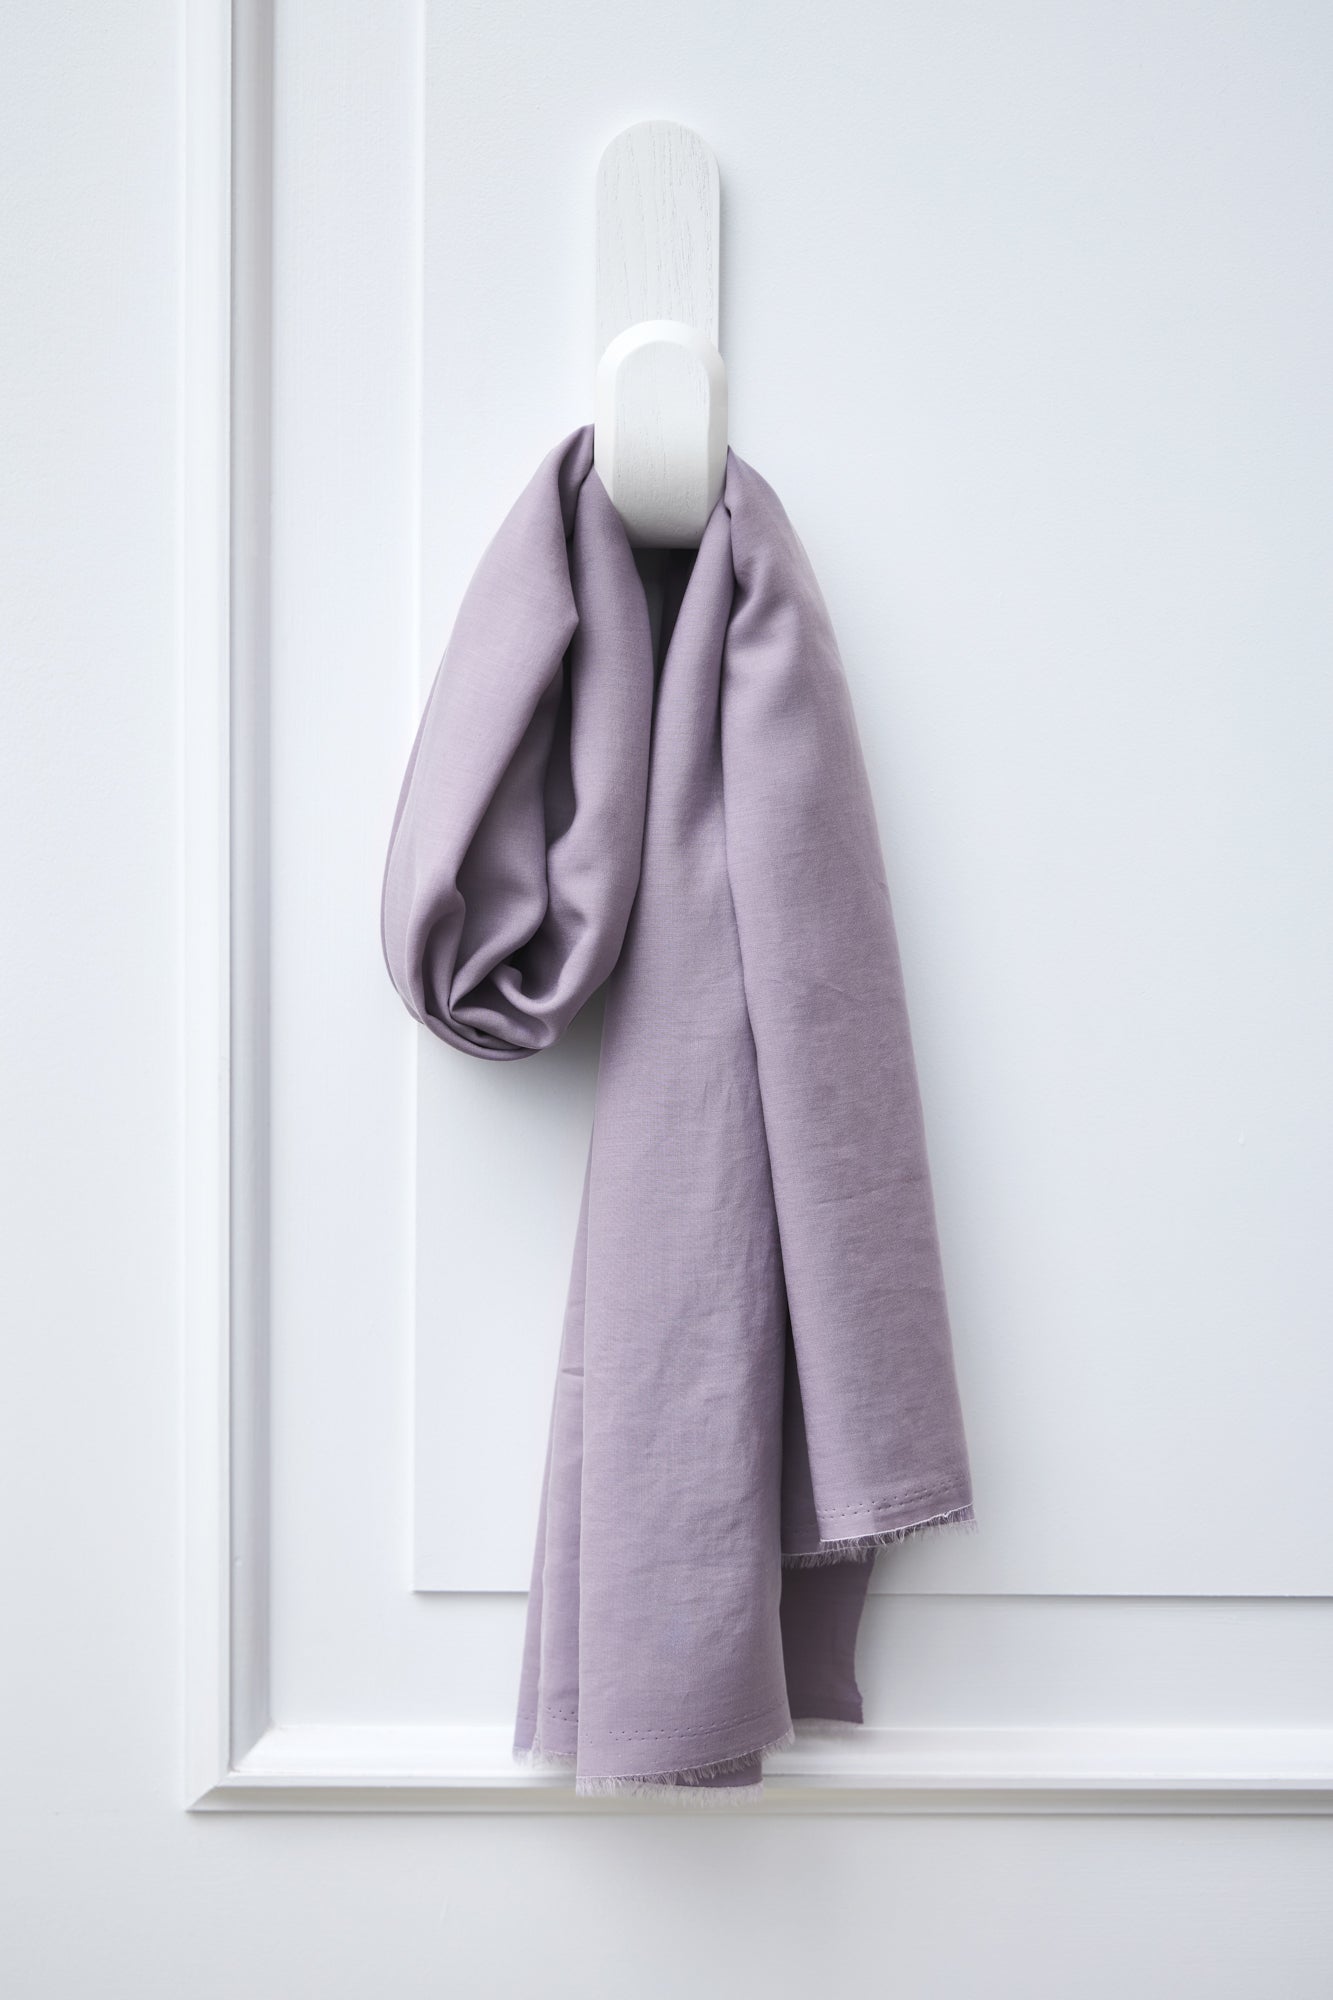 Piece of Vida voile tencel sewing fabric in colour purple haze, hanging on white hook